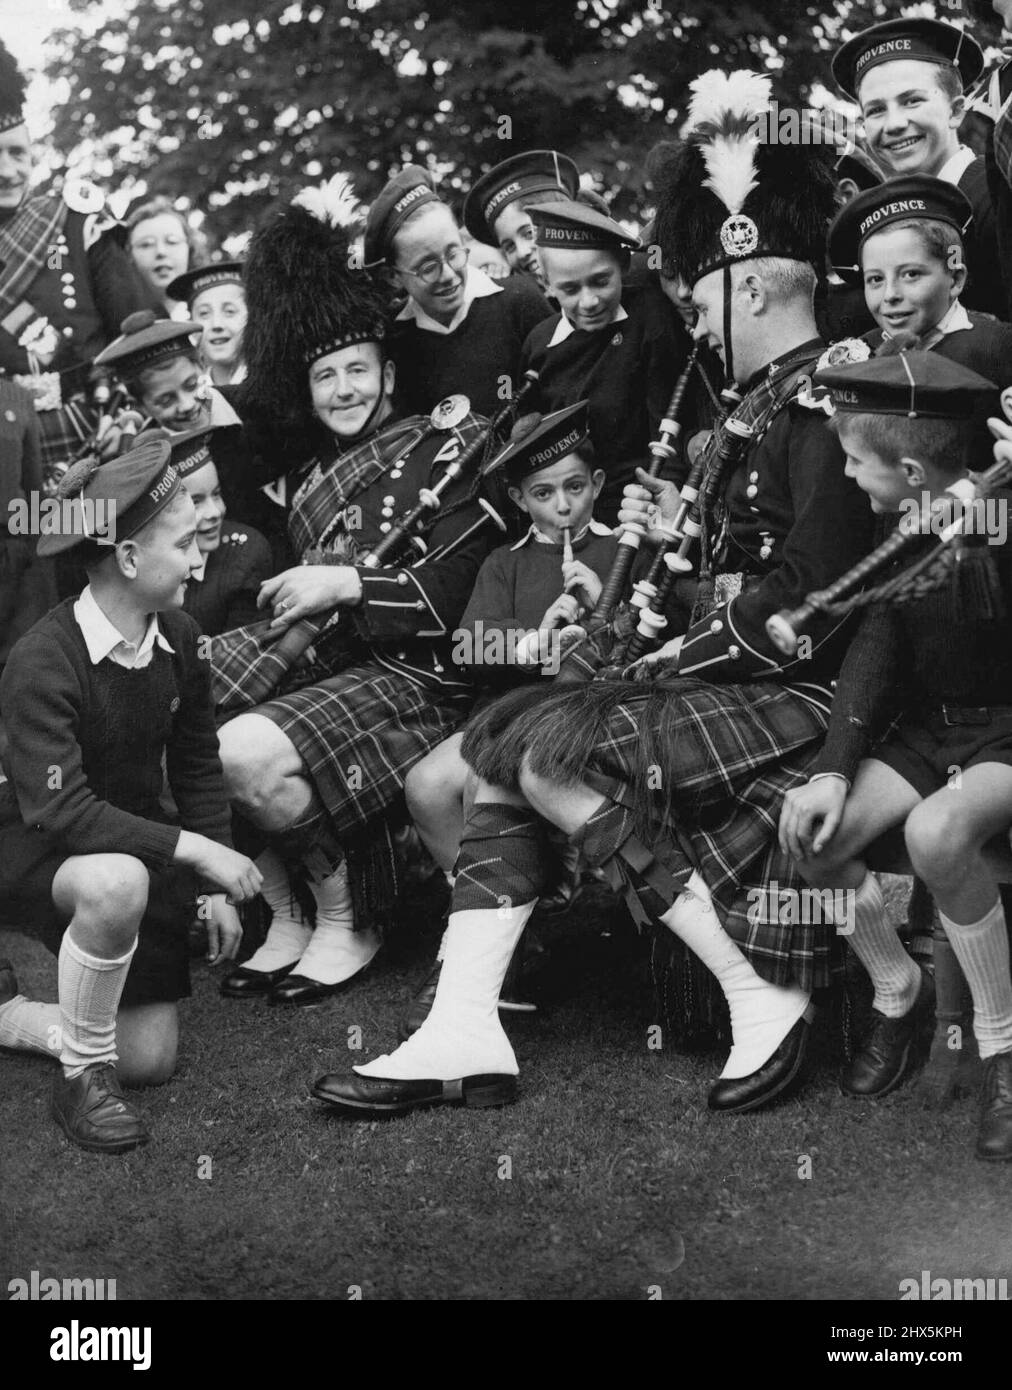 Edinburgh Festival -- A case of fraternisation between the pipers and the provencal choirboys. Little boy blowing the bagpipes. Is II year old Heiri Piery from Marseilles. His comment afterwards : 'C' est formidable'. August 24, 1950. (Photo by D. Johnson, Paul Popper Ltd.). Stock Photo